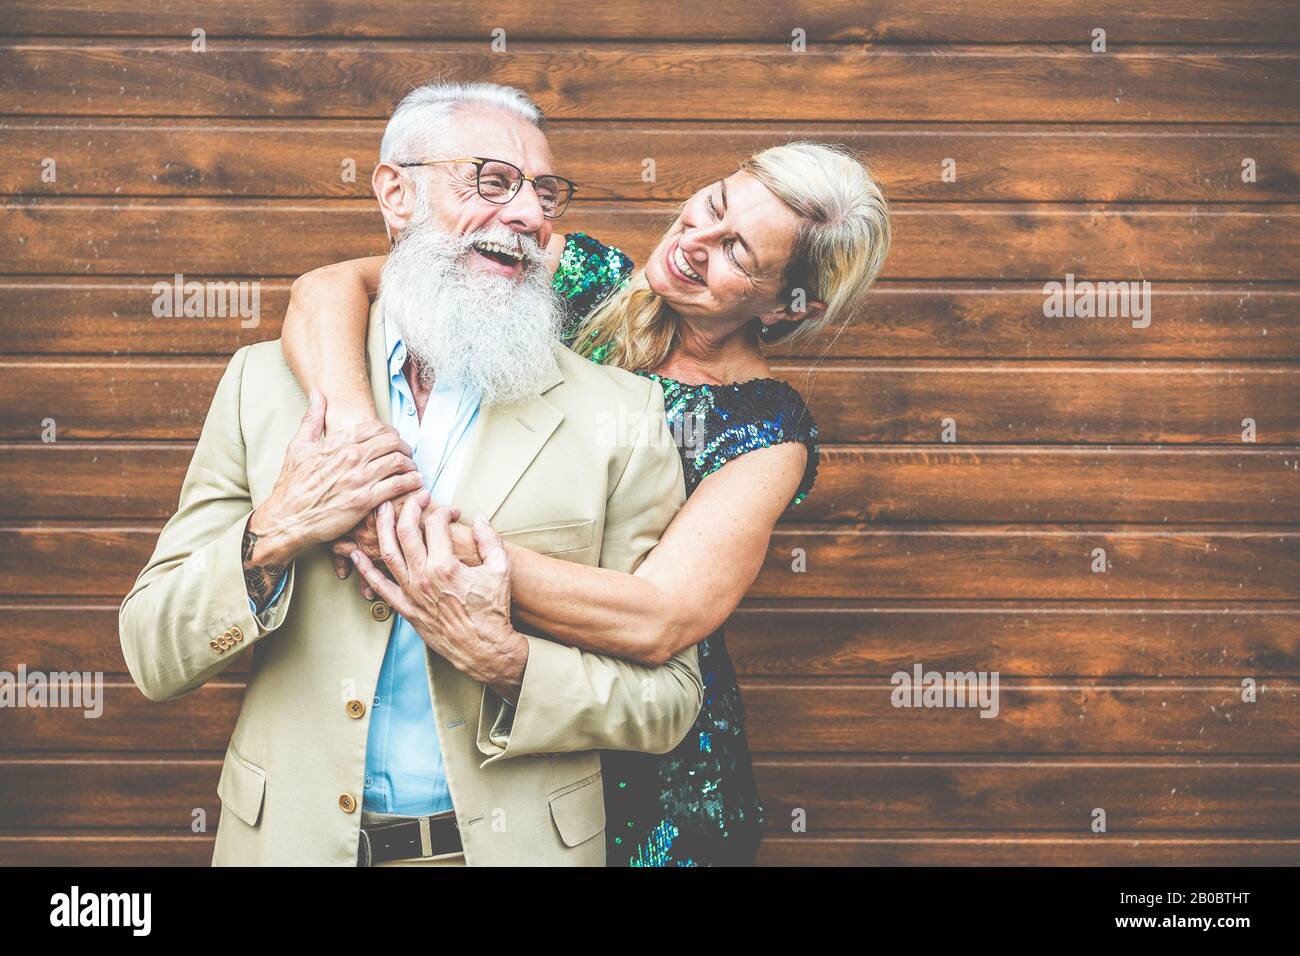 Happy senior couple having fun outdoor - Mature people laughing and having tender moments - Love, fashion and joyful elderly active lifestyle concept Stock Photo